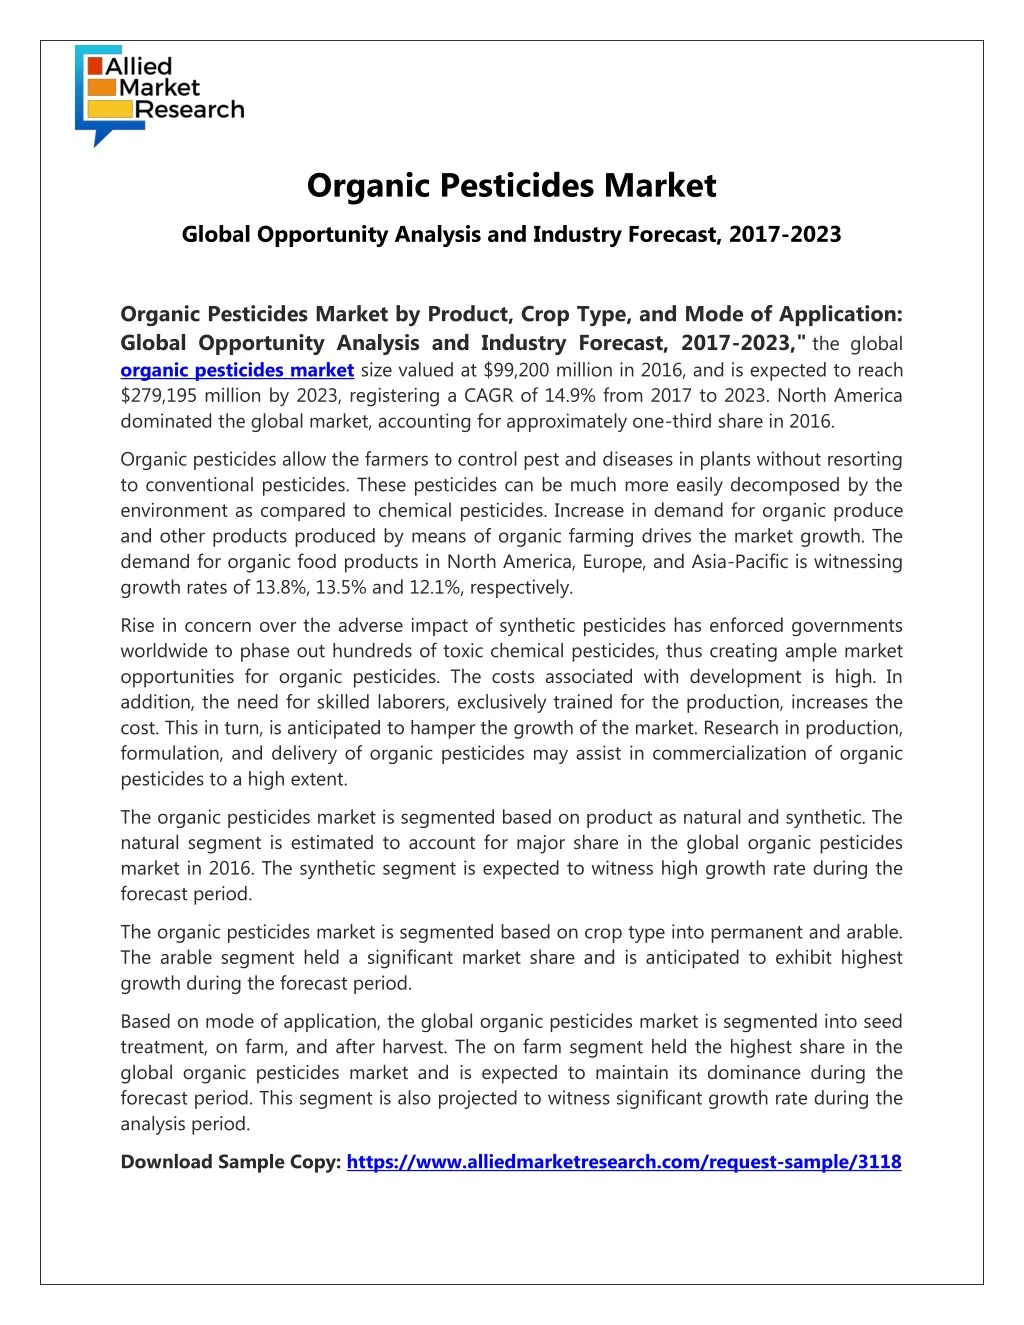 organic pesticides market global opportunity